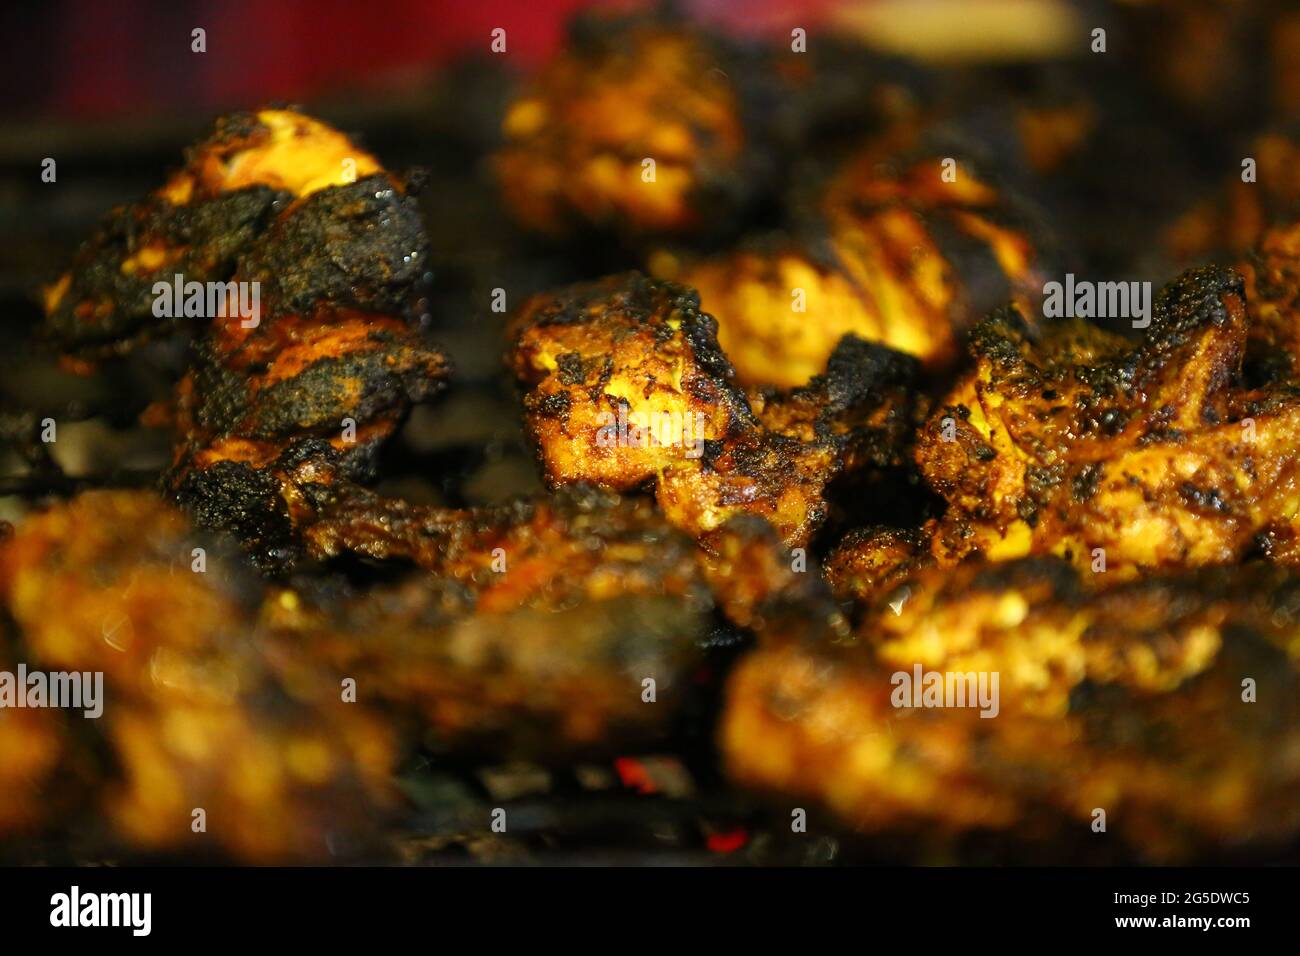 Tasty chicken legs and wings on the grill with fire flames Stock Photo